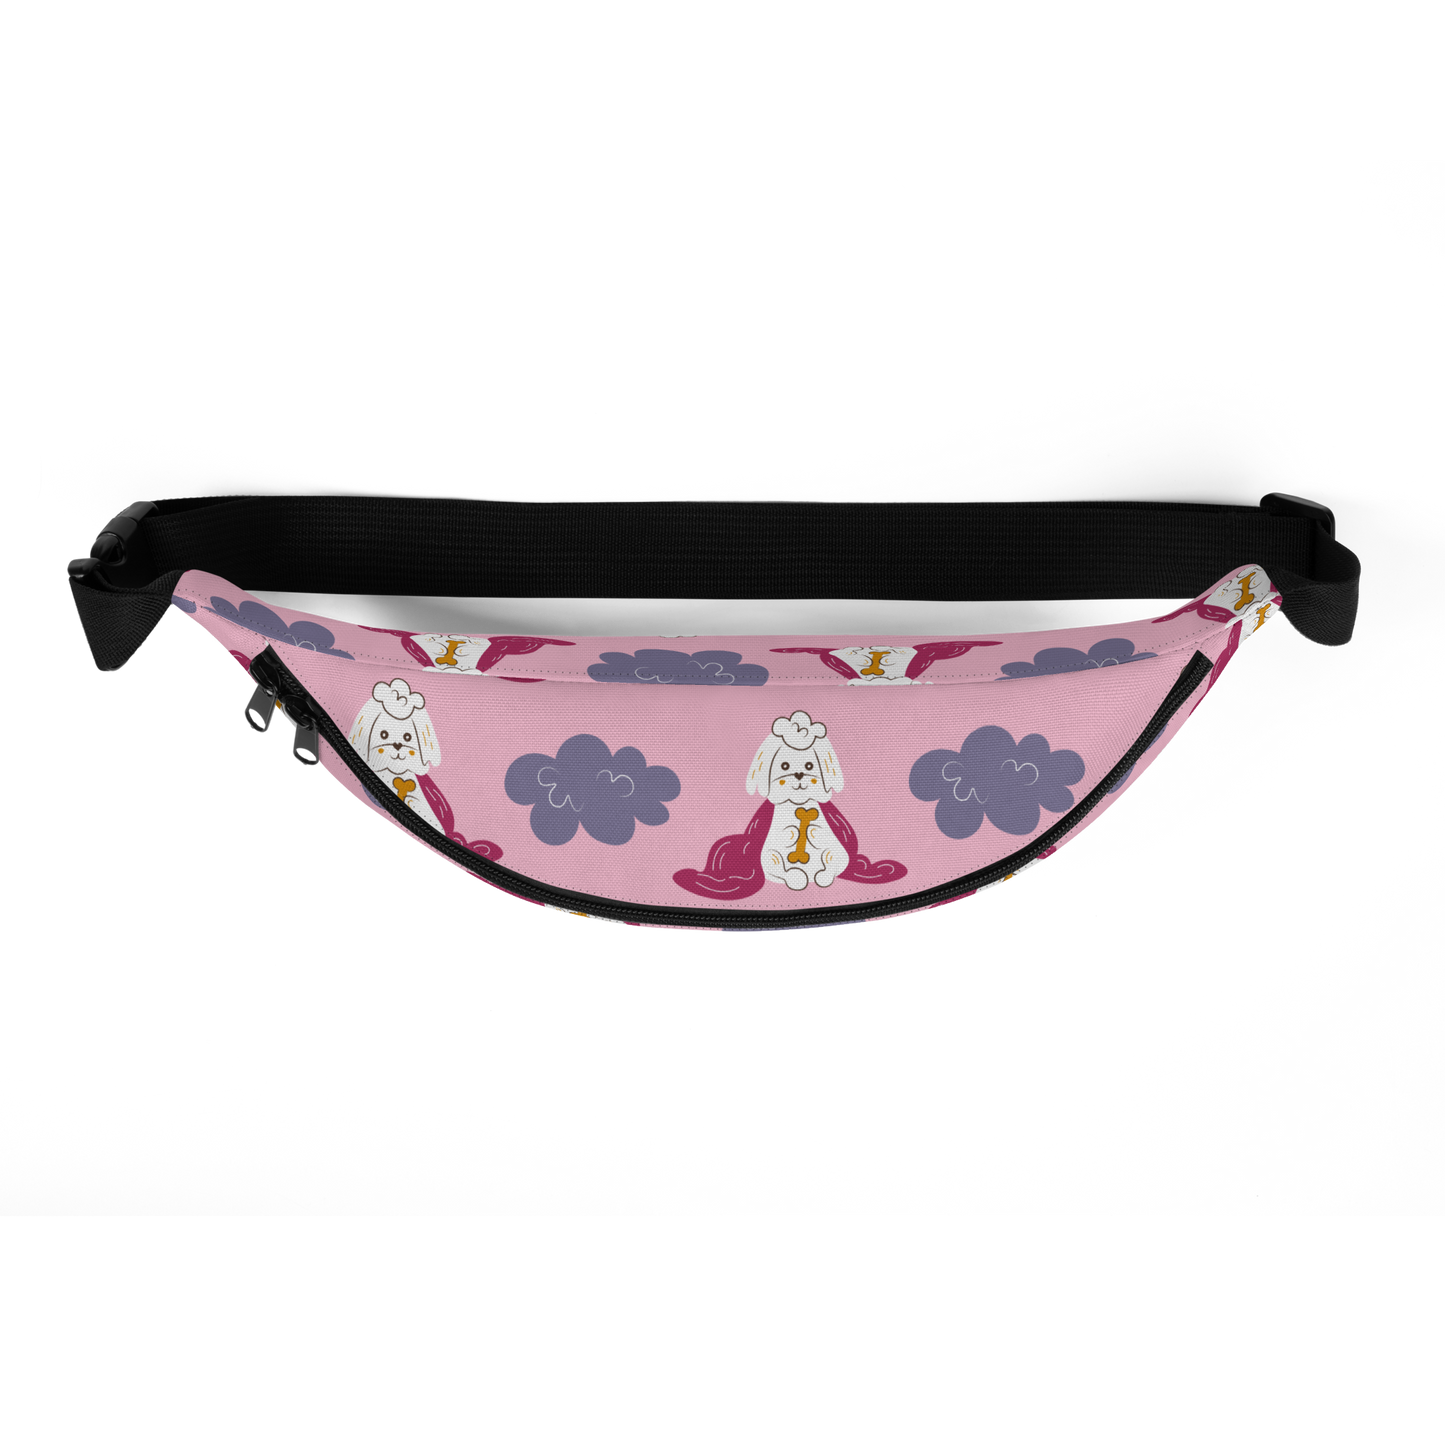 Cozy Dogs | Seamless Patterns | All-Over Print Fanny Pack - #10